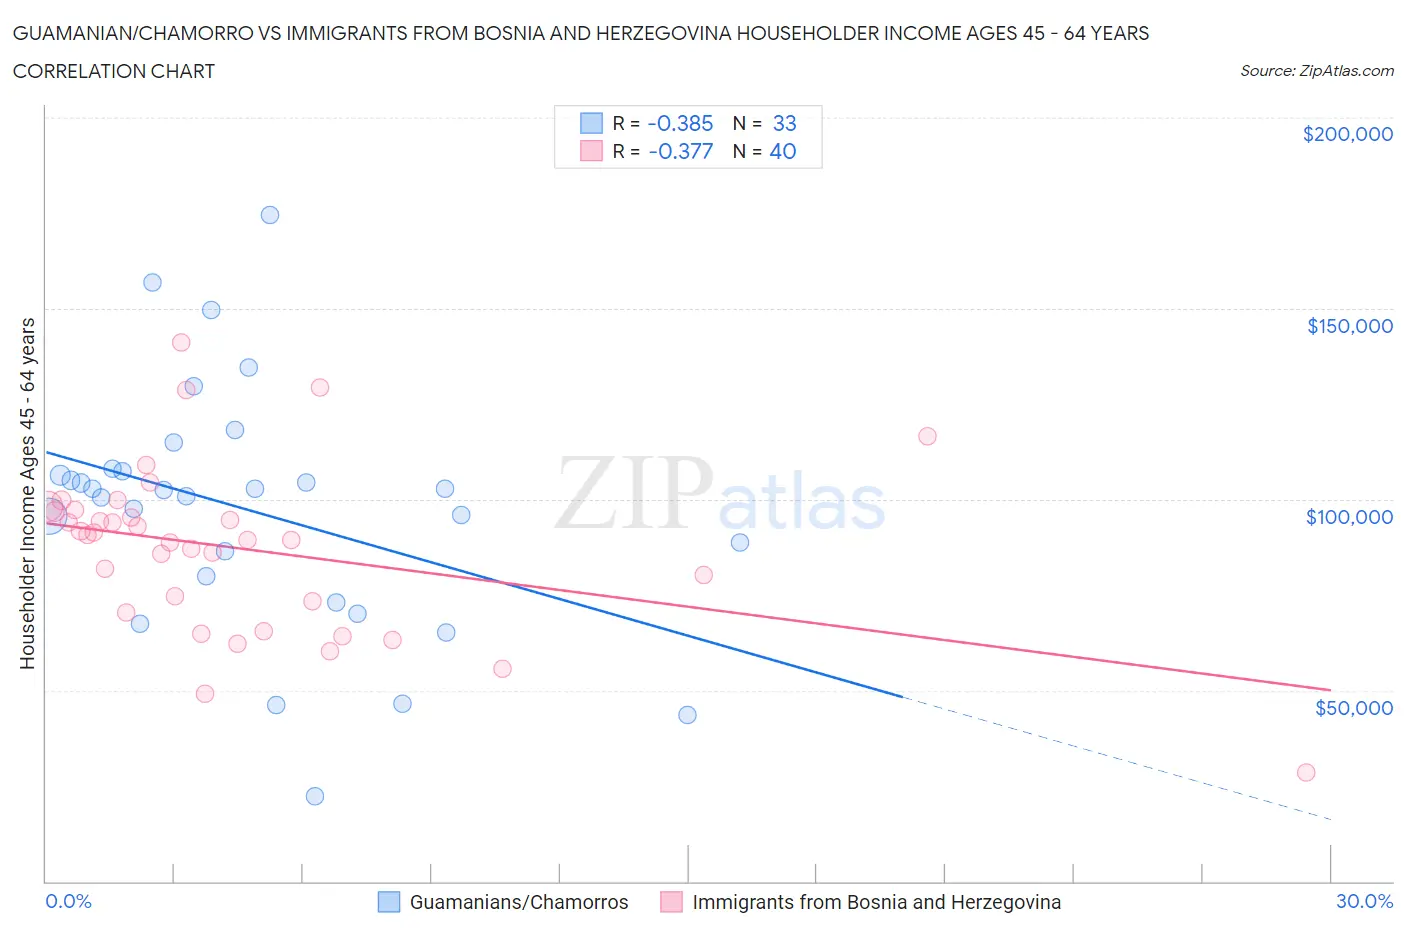 Guamanian/Chamorro vs Immigrants from Bosnia and Herzegovina Householder Income Ages 45 - 64 years